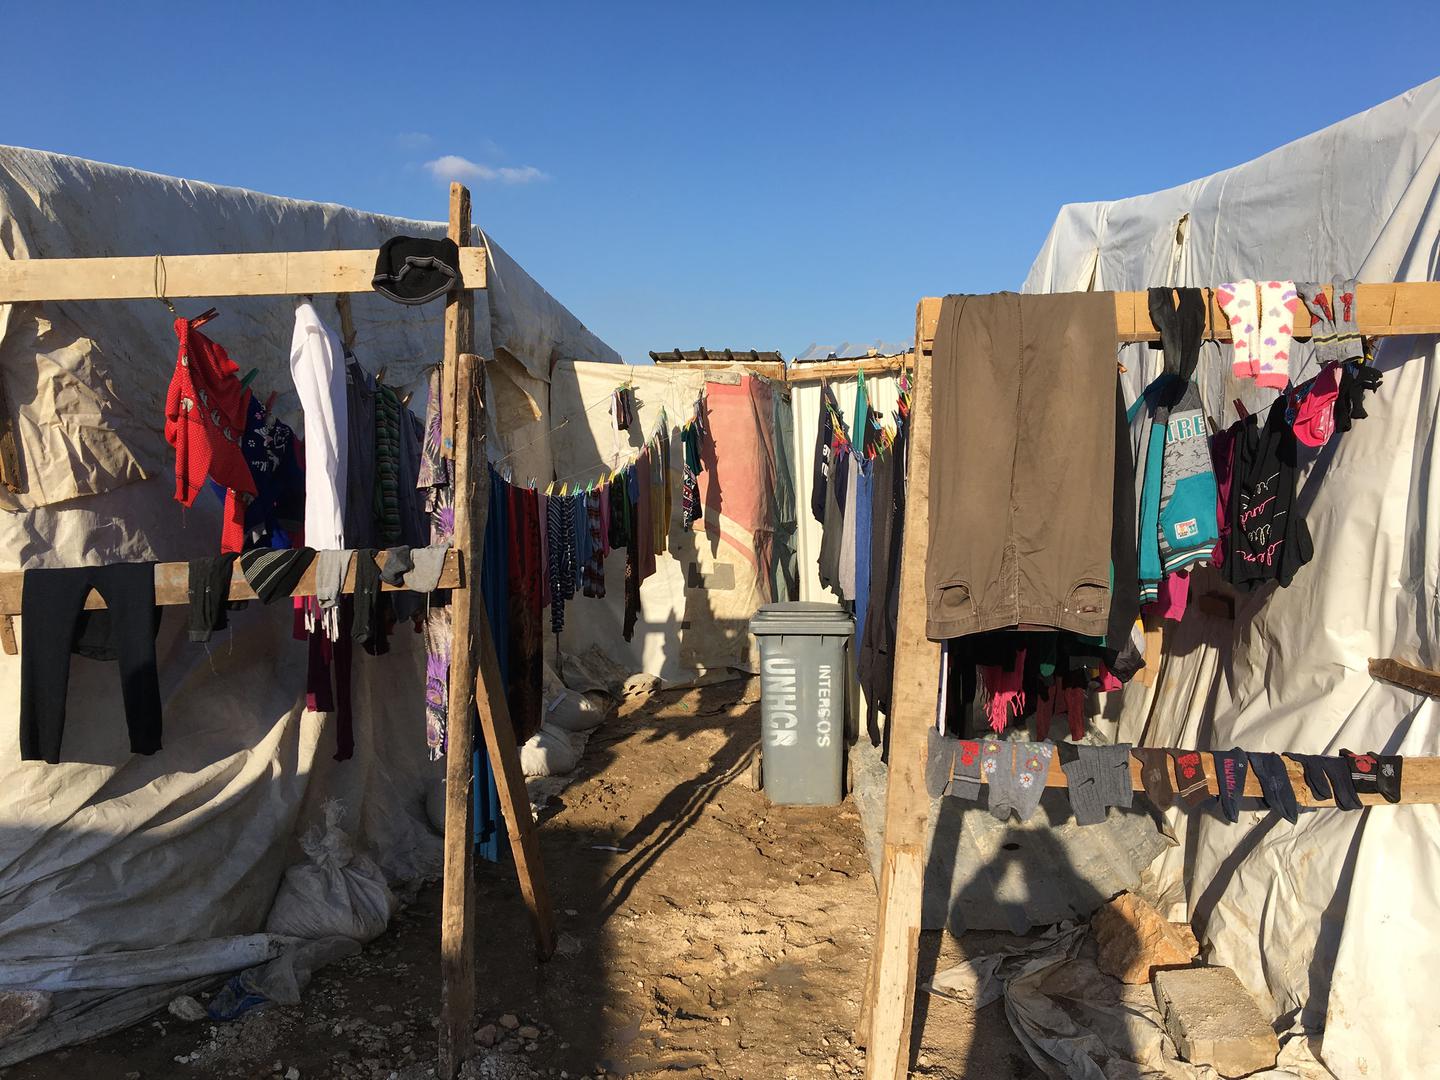 A clothesline in an informal tent settlement in Bar Elias, Bekaa Governorate, Lebanon. Refugees evicted from the Rayak air base area settled here in January 2018. The refugees say there was no procedure, no written notice, no opportunity to discuss or challenge their removal, and that it took place in extremely harsh conditions.